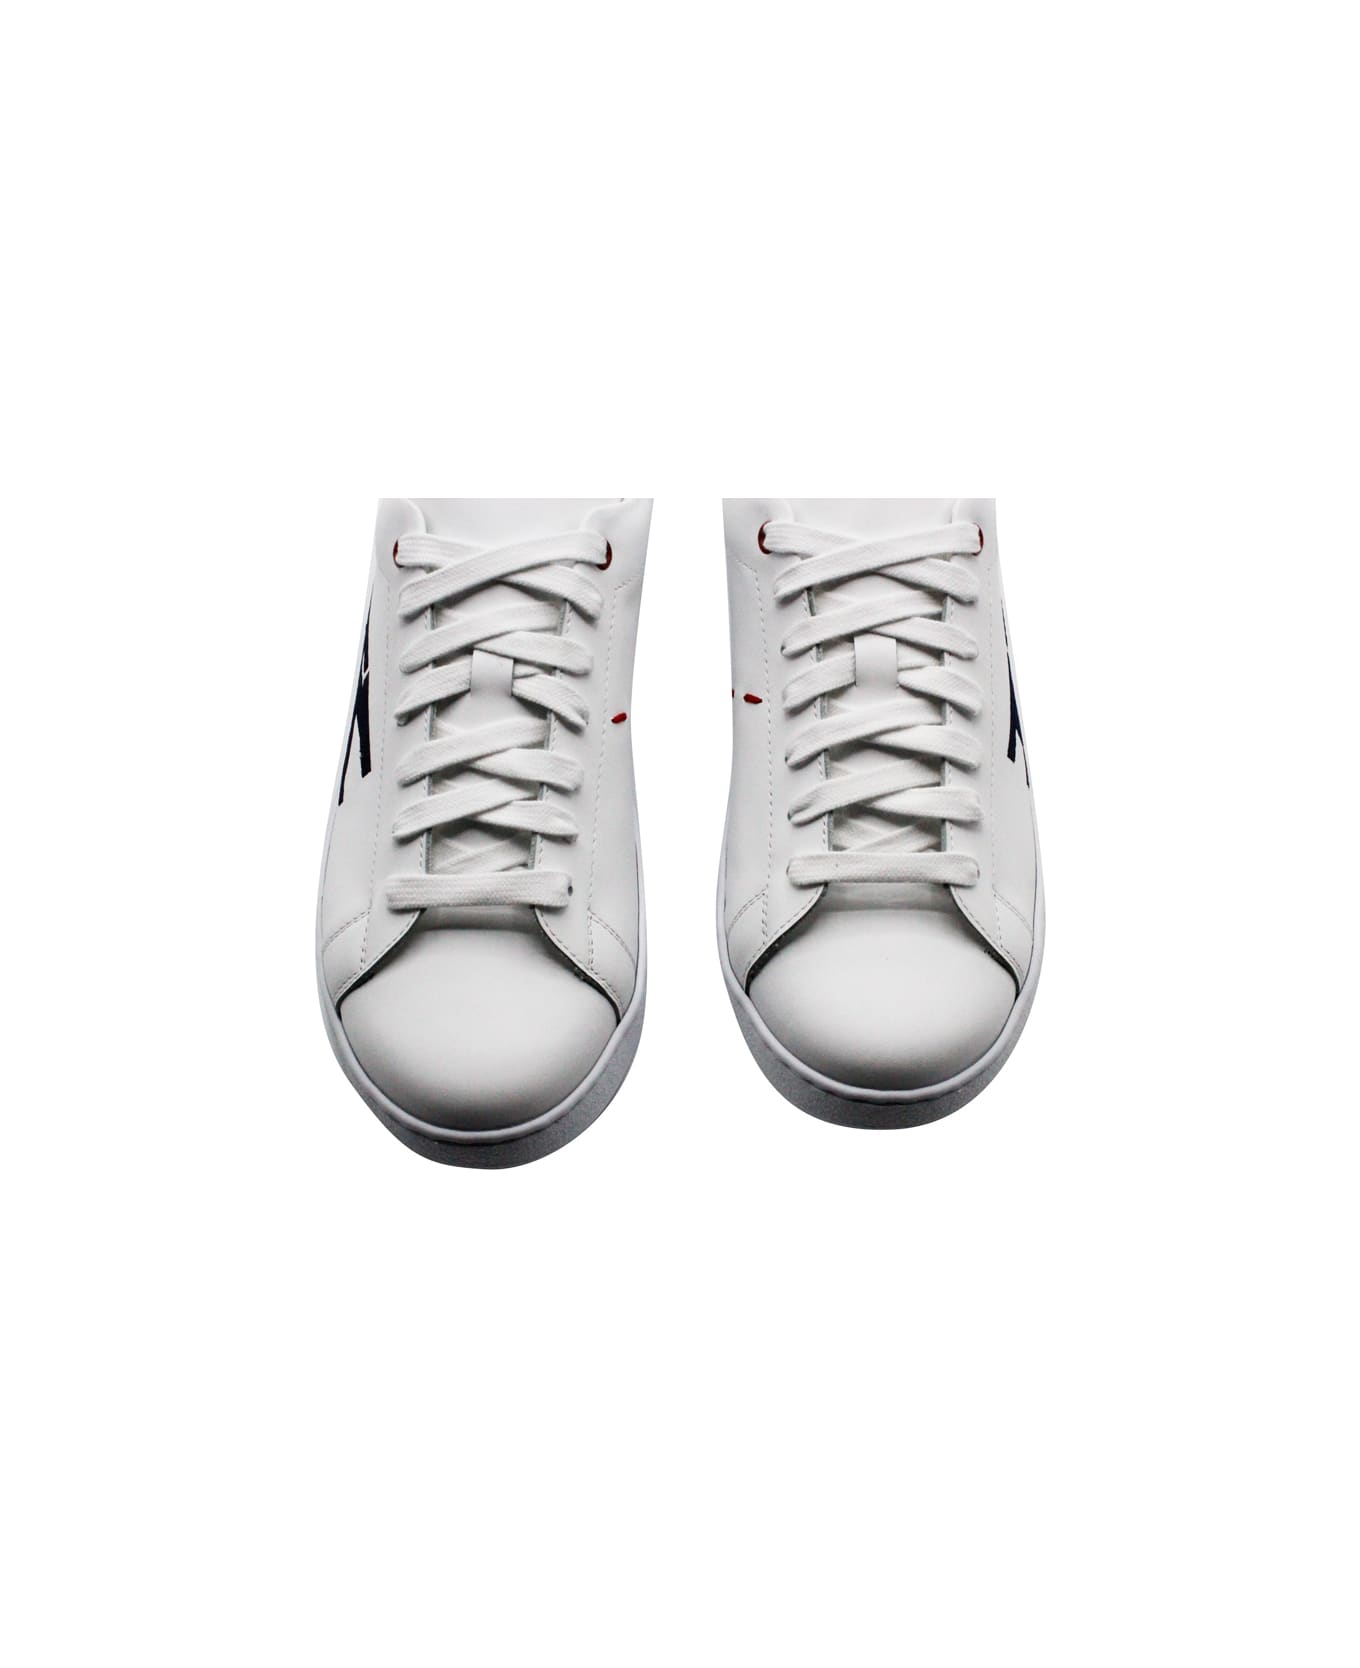 Kiton Sneackers Shoe In Leather With Suede Trims And With Contrasting Stitching. - White スニーカー